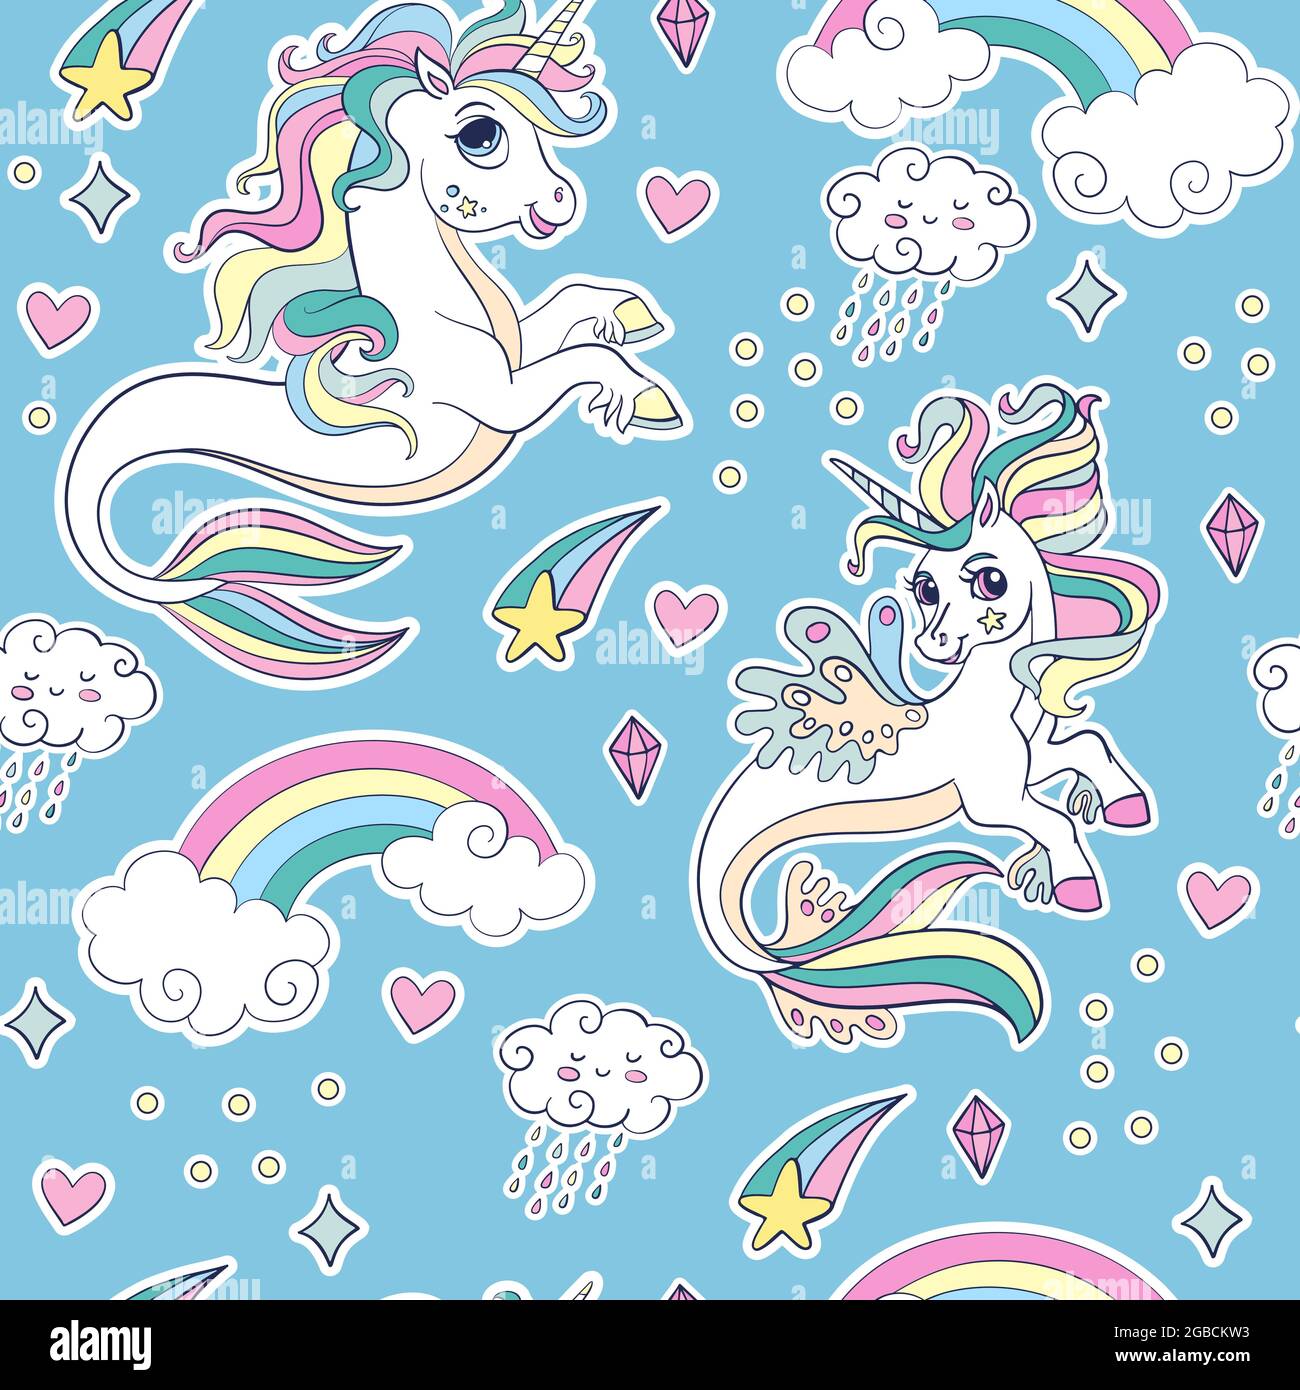 Magical Unicorn from the Rainbow Land print by Dolphins